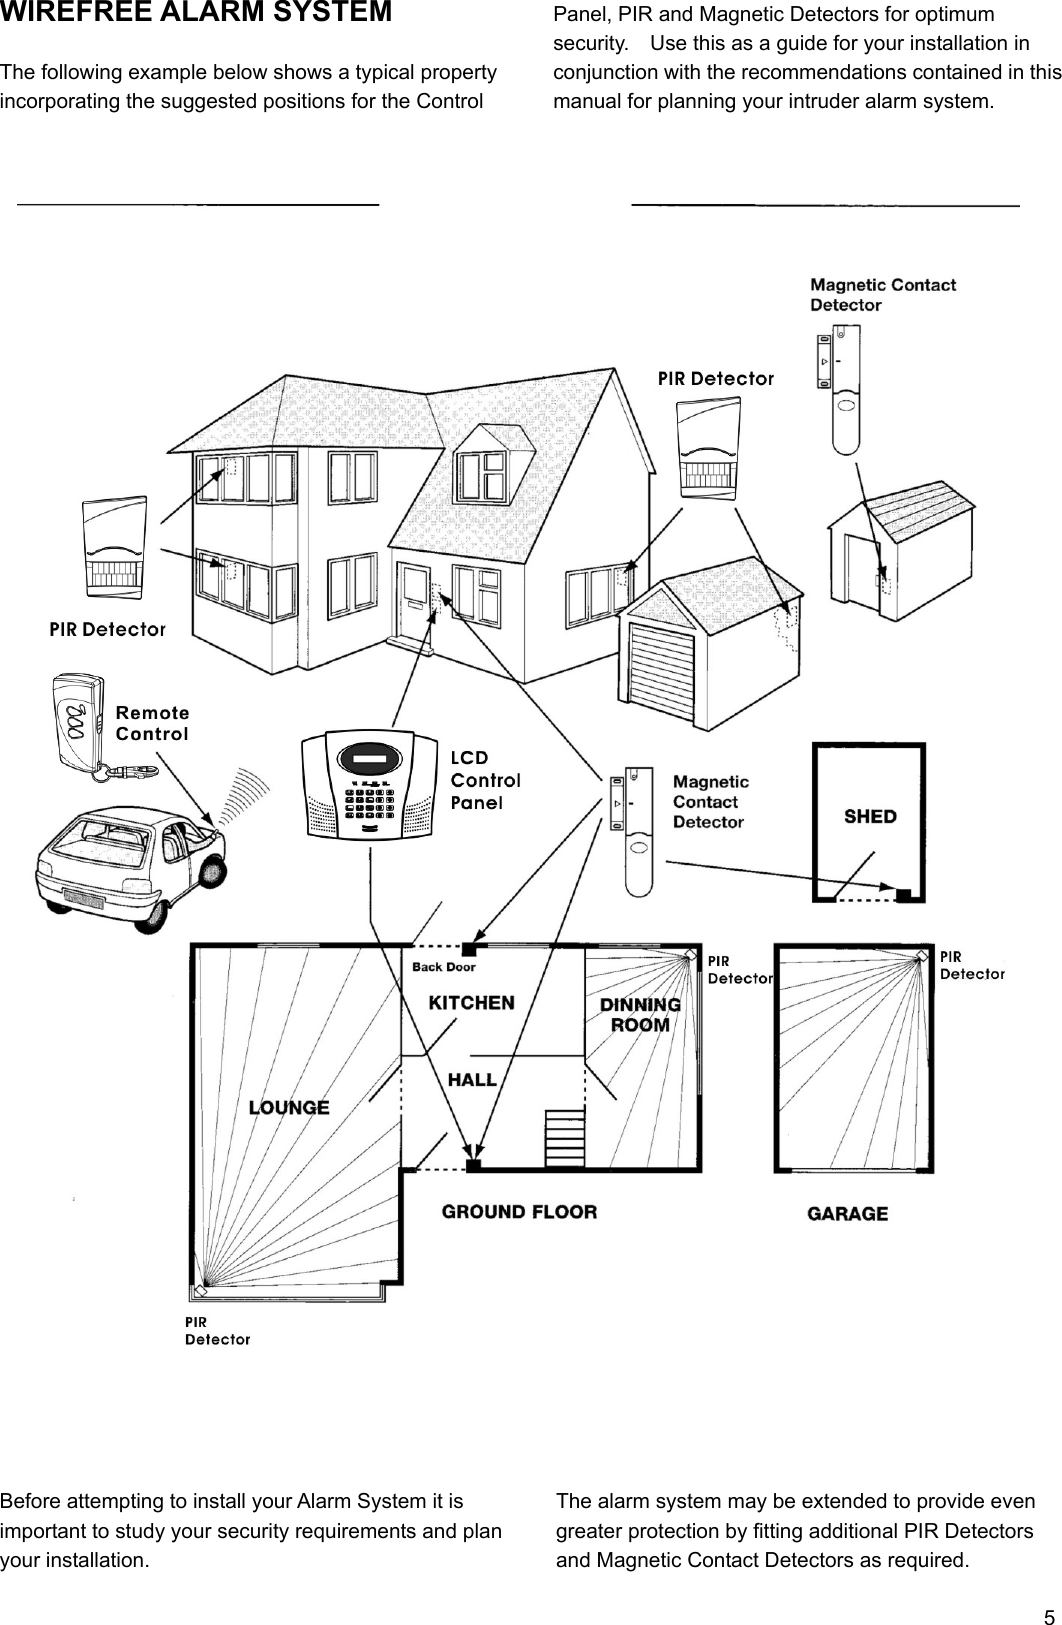 WIREFREE ALARM SYSTEM  The following example below shows a typical property incorporating the suggested positions for the Control     Panel, PIR and Magnetic Detectors for optimum security.    Use this as a guide for your installation in conjunction with the recommendations contained in this manual for planning your intruder alarm system.                                               Before attempting to install your Alarm System it is important to study your security requirements and plan your installation.    The alarm system may be extended to provide even greater protection by fitting additional PIR Detectors and Magnetic Contact Detectors as required.                                                 5 